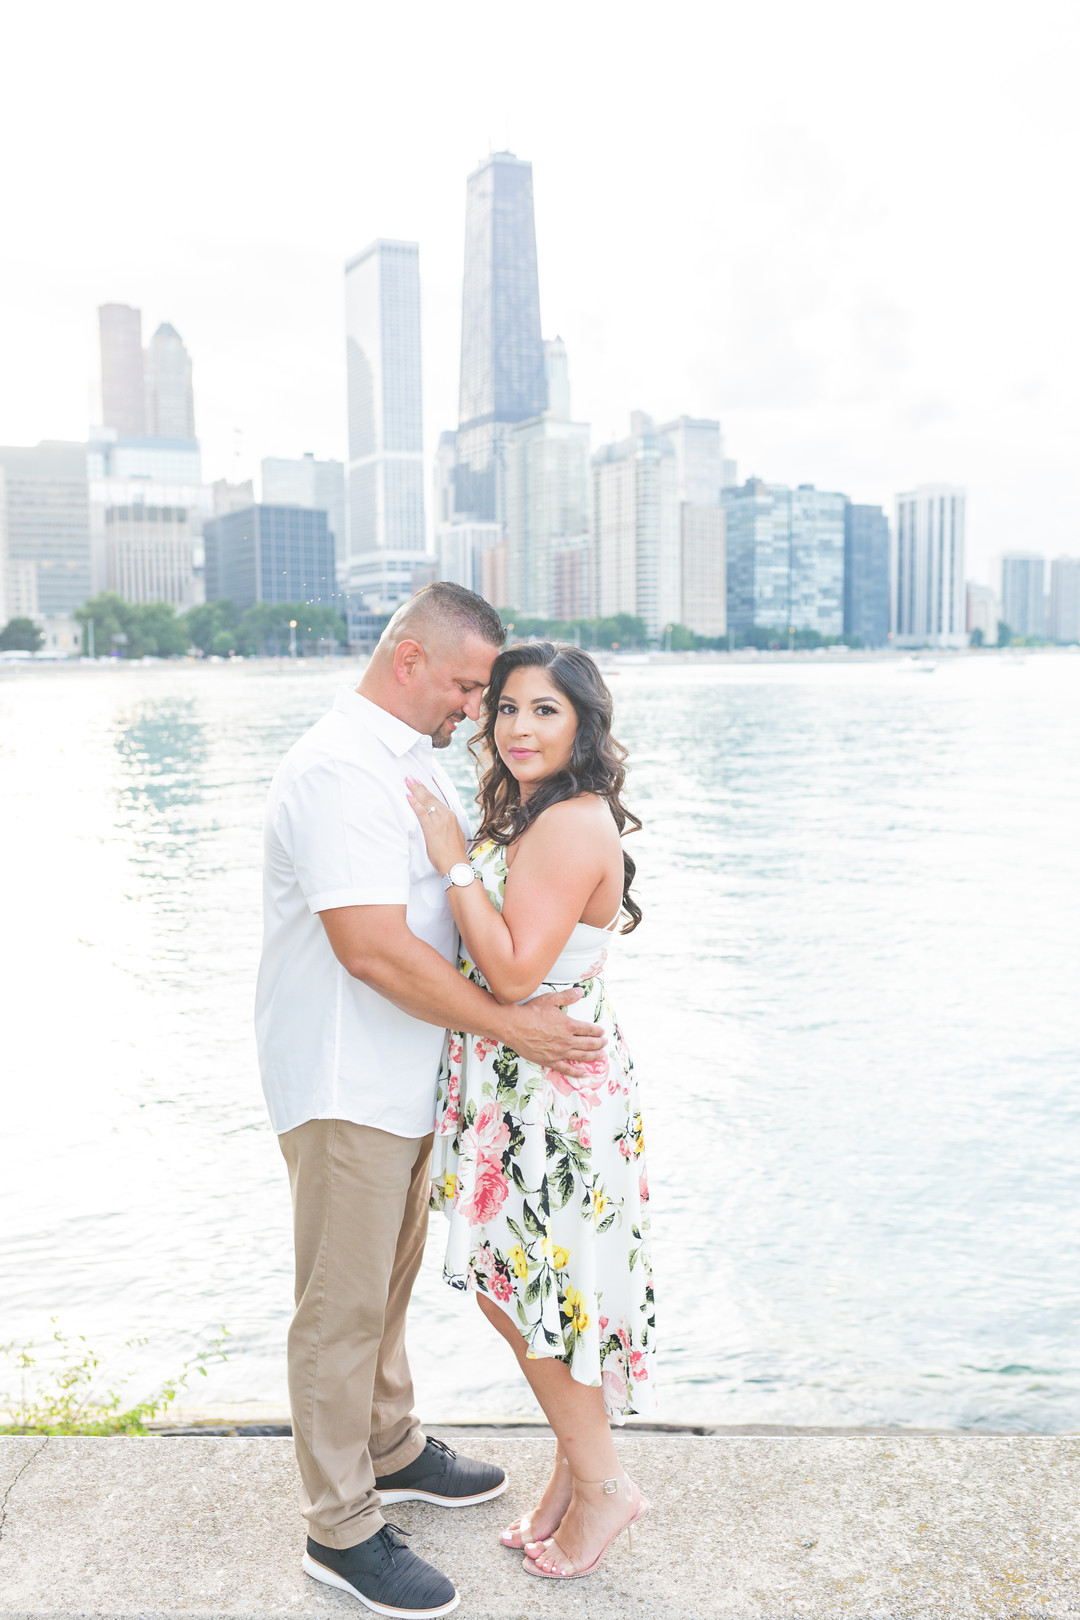 Chicago skyline engagement session captured by Emma Belen Photography. See more engagement photo ideas featured on CHItheeWED.com!